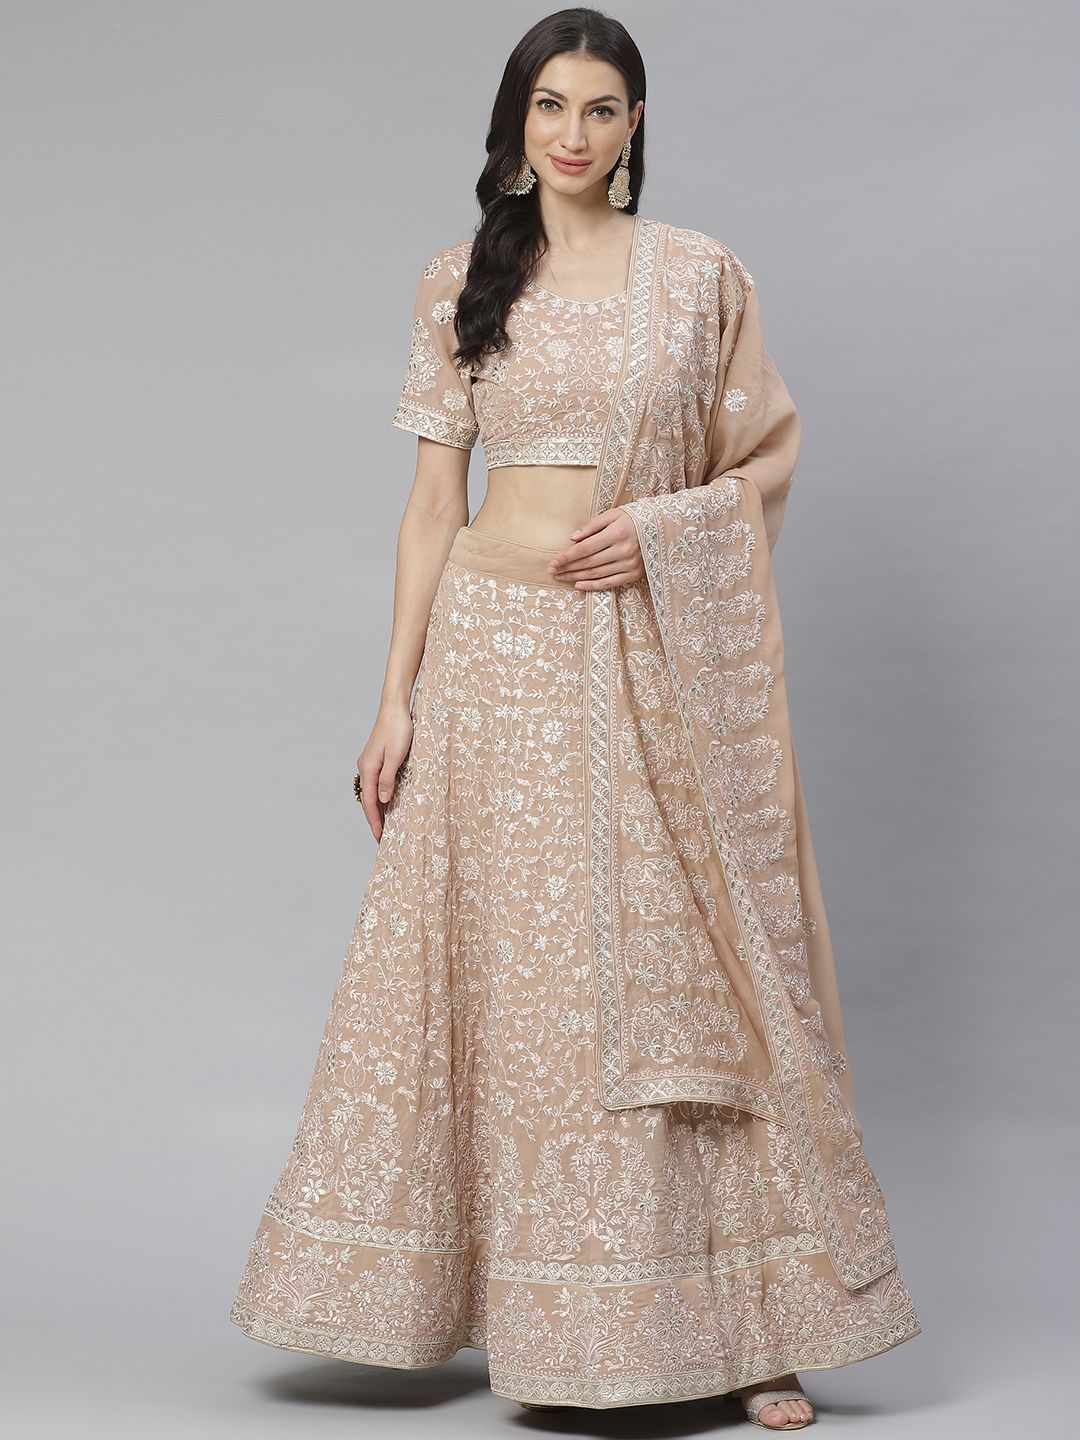 Readiprint Fashions Beige & White Embroidered Semi-Stitched Lehenga & Unstitched Blouse with Dupatta Price in India